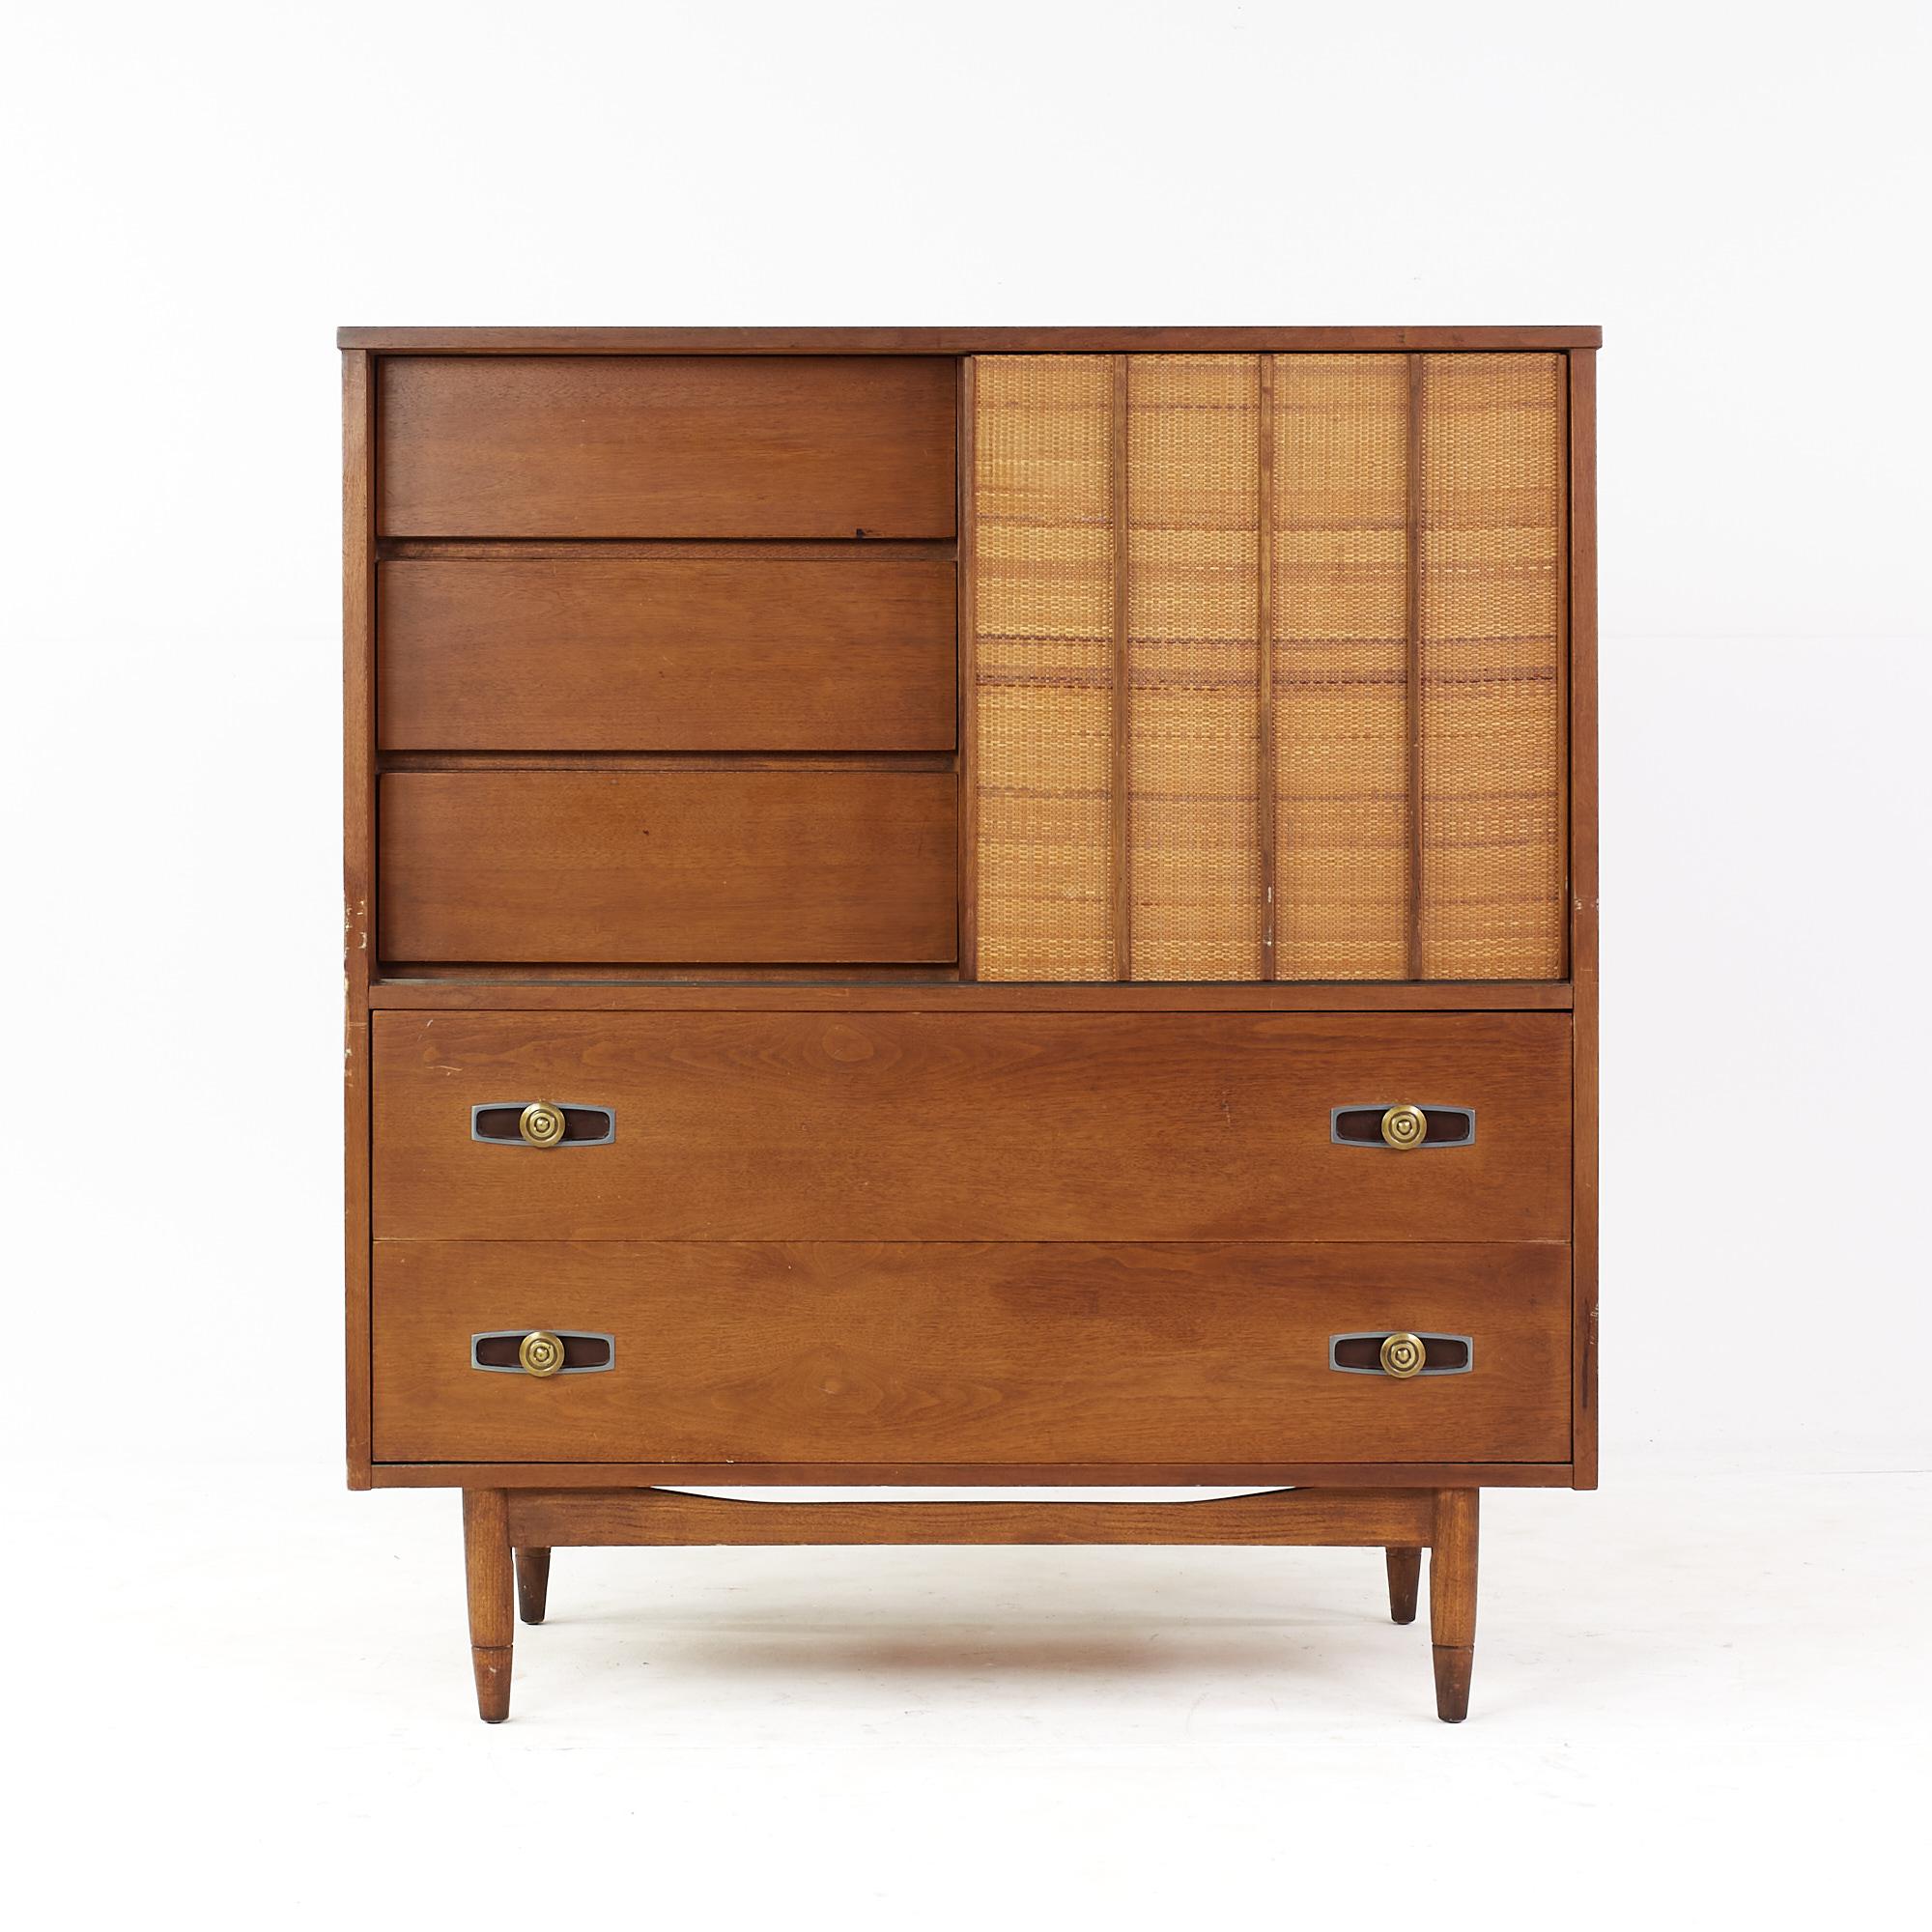 Mainline by Hooker mid century walnut and cane 8 drawer highboy dresser

This highboy dresser measures: 42 wide x 20 deep x 46.75 inches high

All pieces of furniture can be had in what we call restored vintage condition. That means the piece is